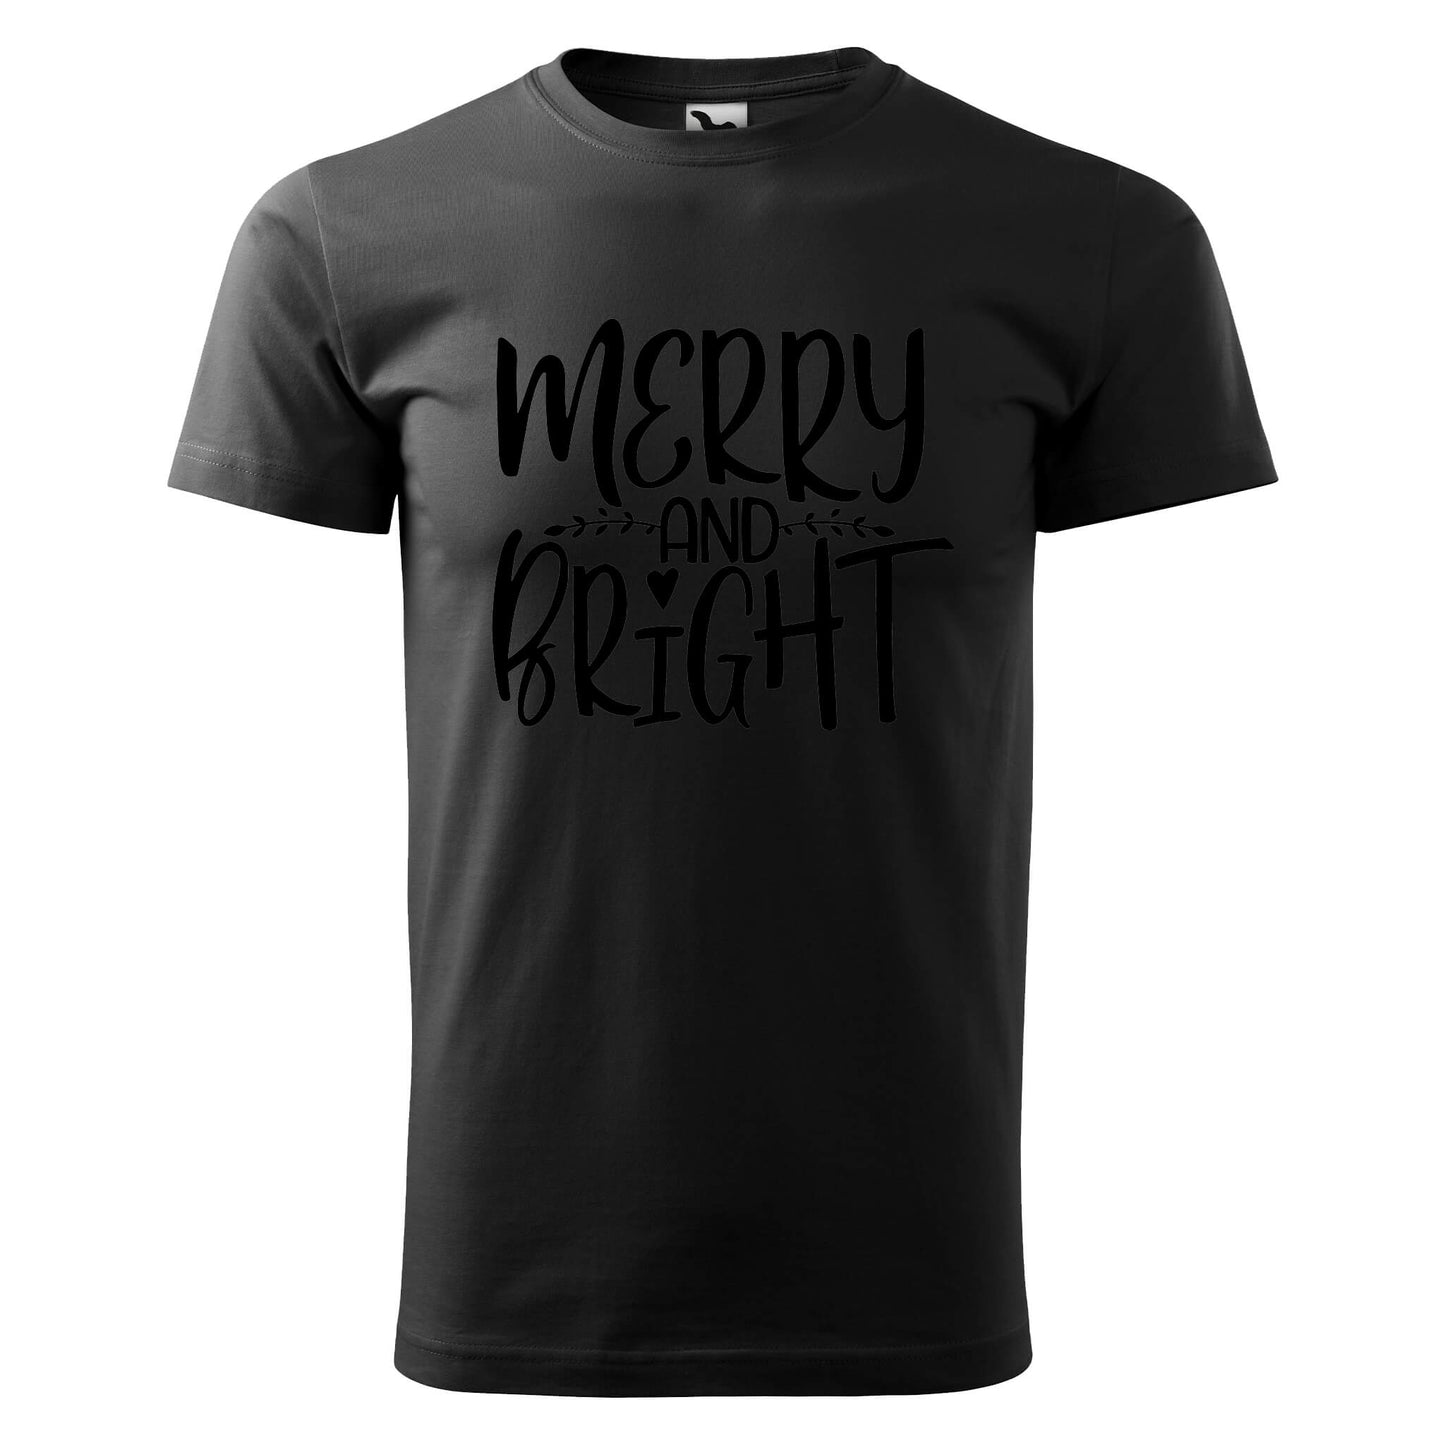 Merry and bright t-shirt - rvdesignprint